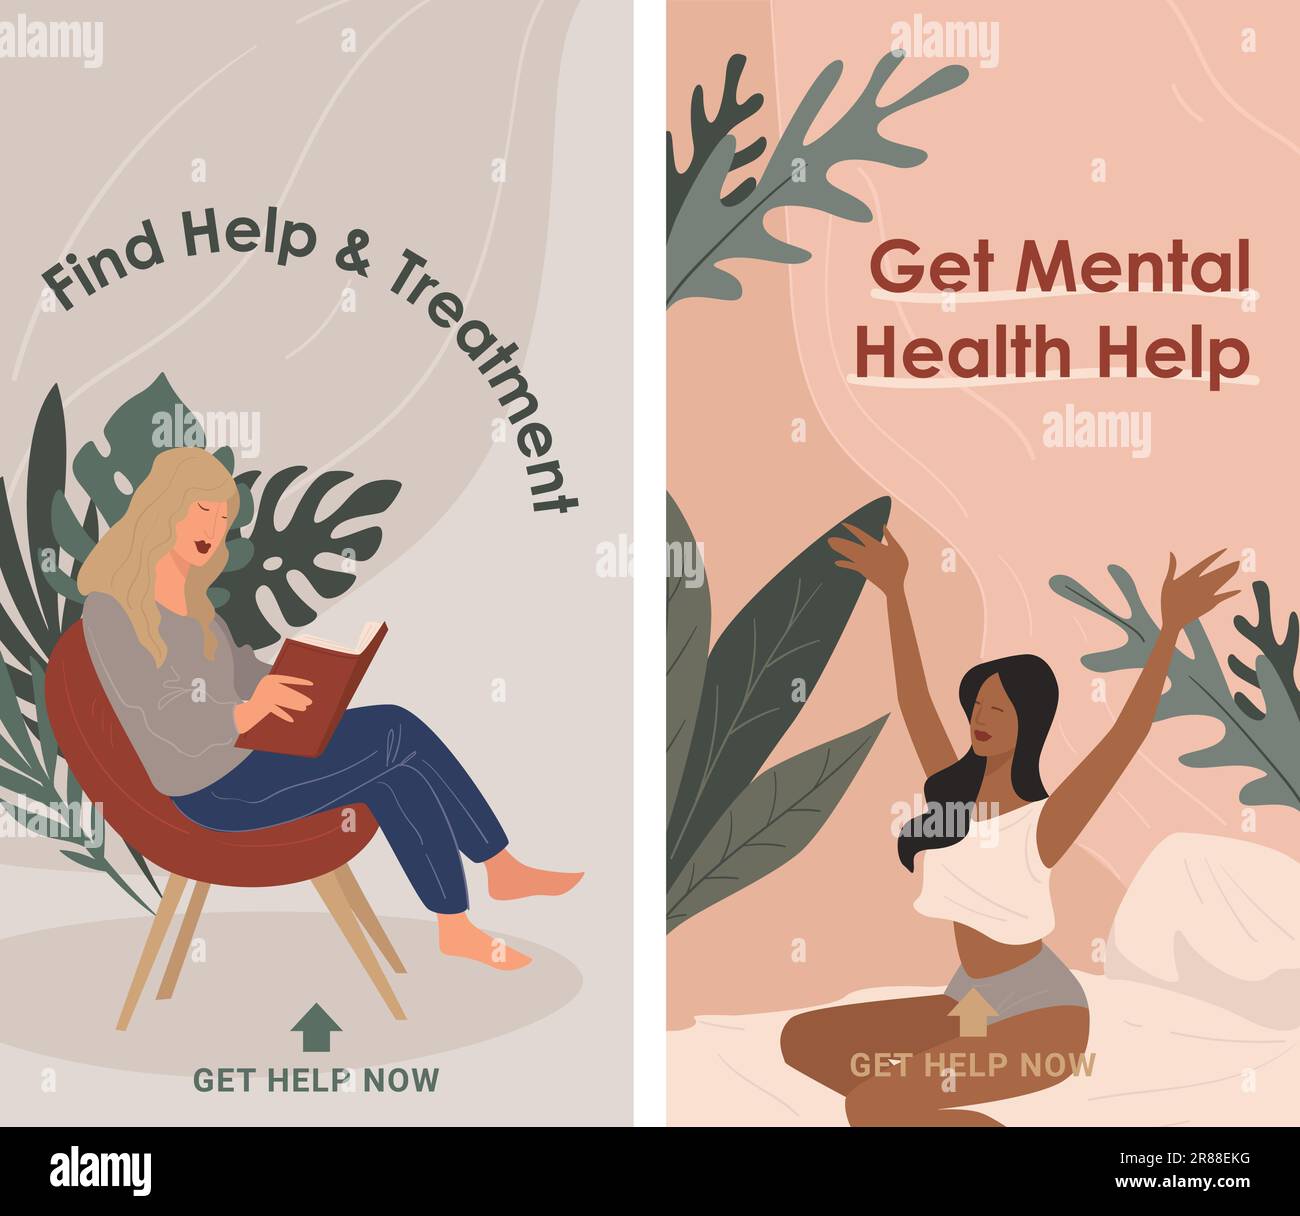 Mental health assistance and help, find recommendations to come with feelings and be healthy. Wellness and wellbeing, calmness and tranquility. Woman Stock Vector